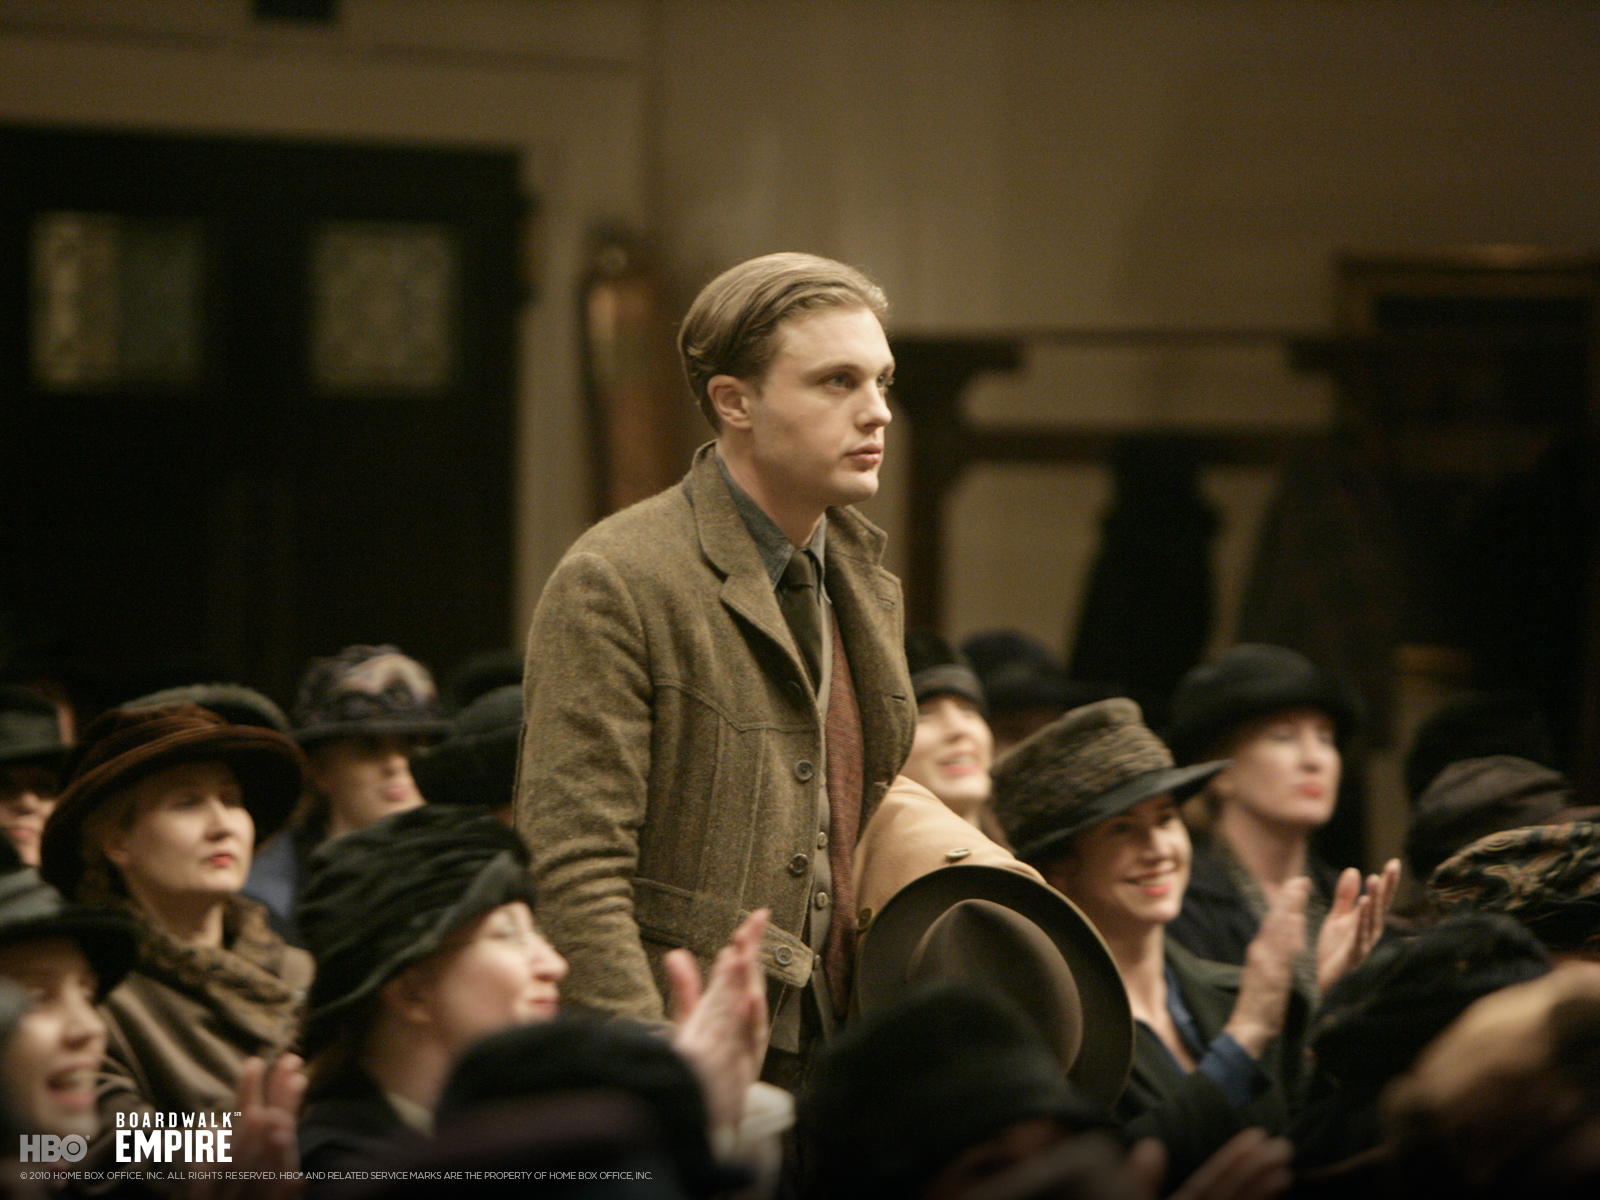 boardwalk empire wallpaper,people,event,audience,fashion,crowd